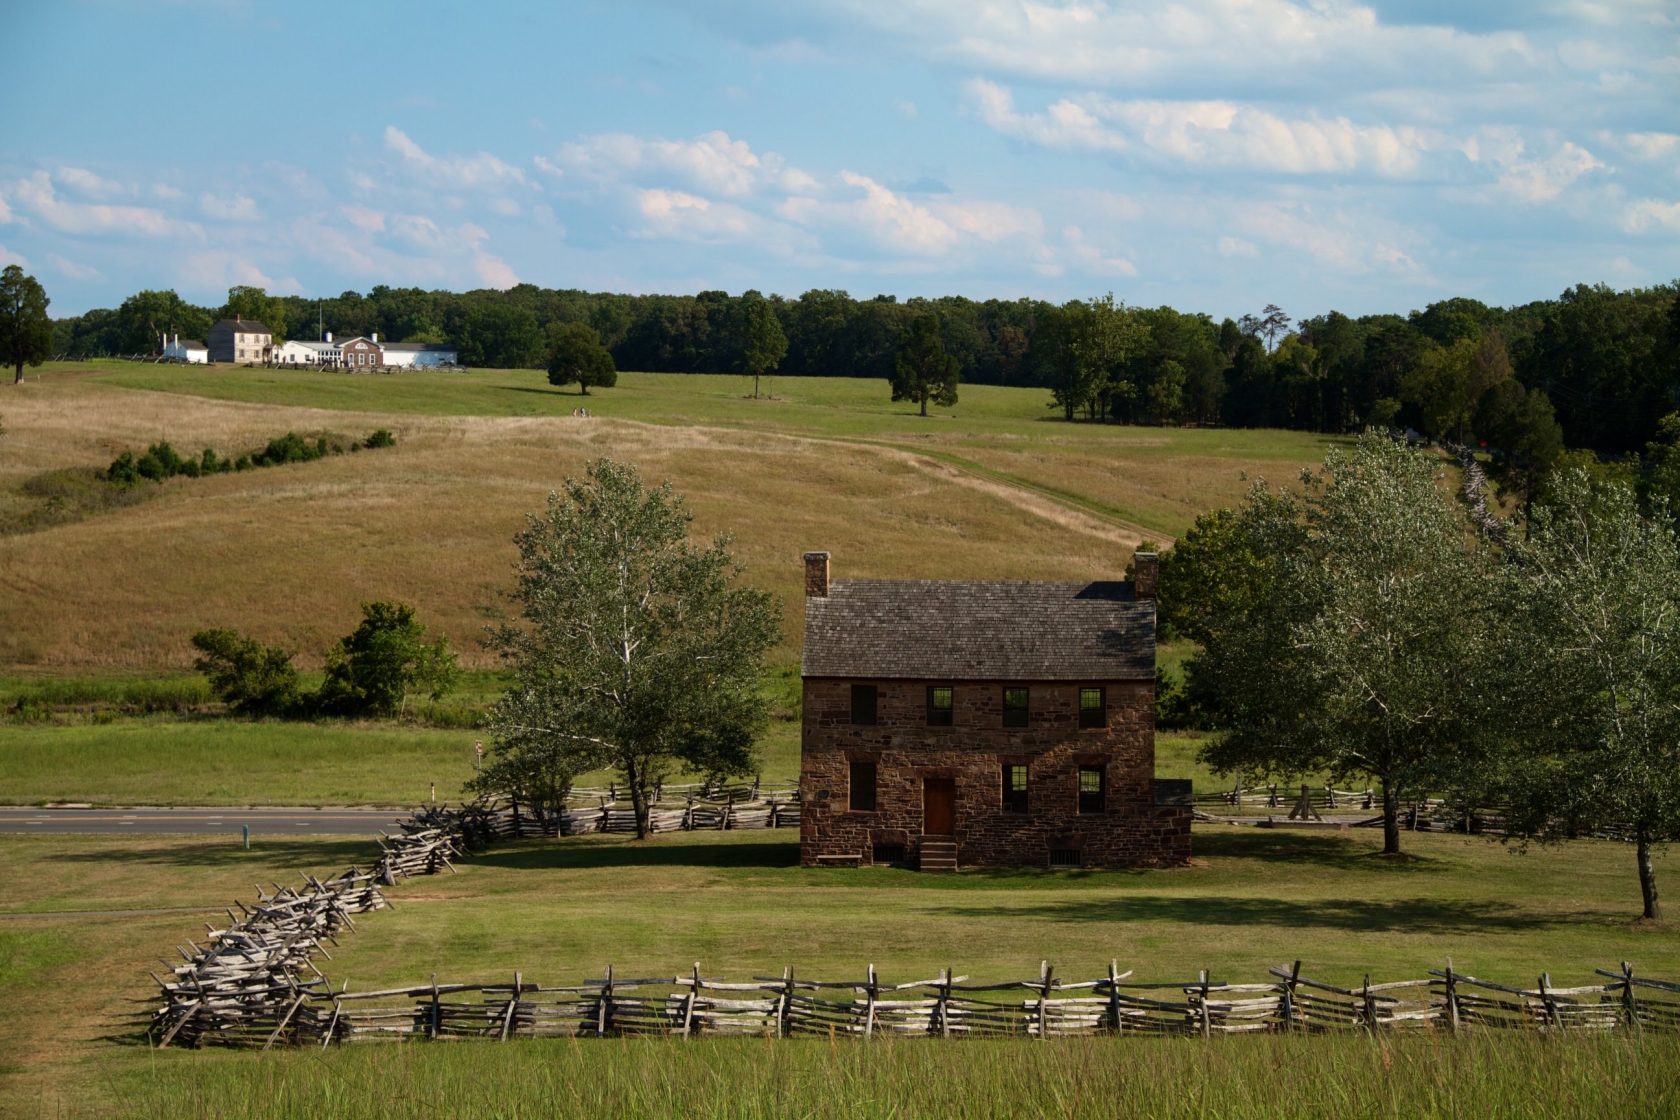 Virginia's Manassas National Battlefield Park, old stone house and trees line the green hills.